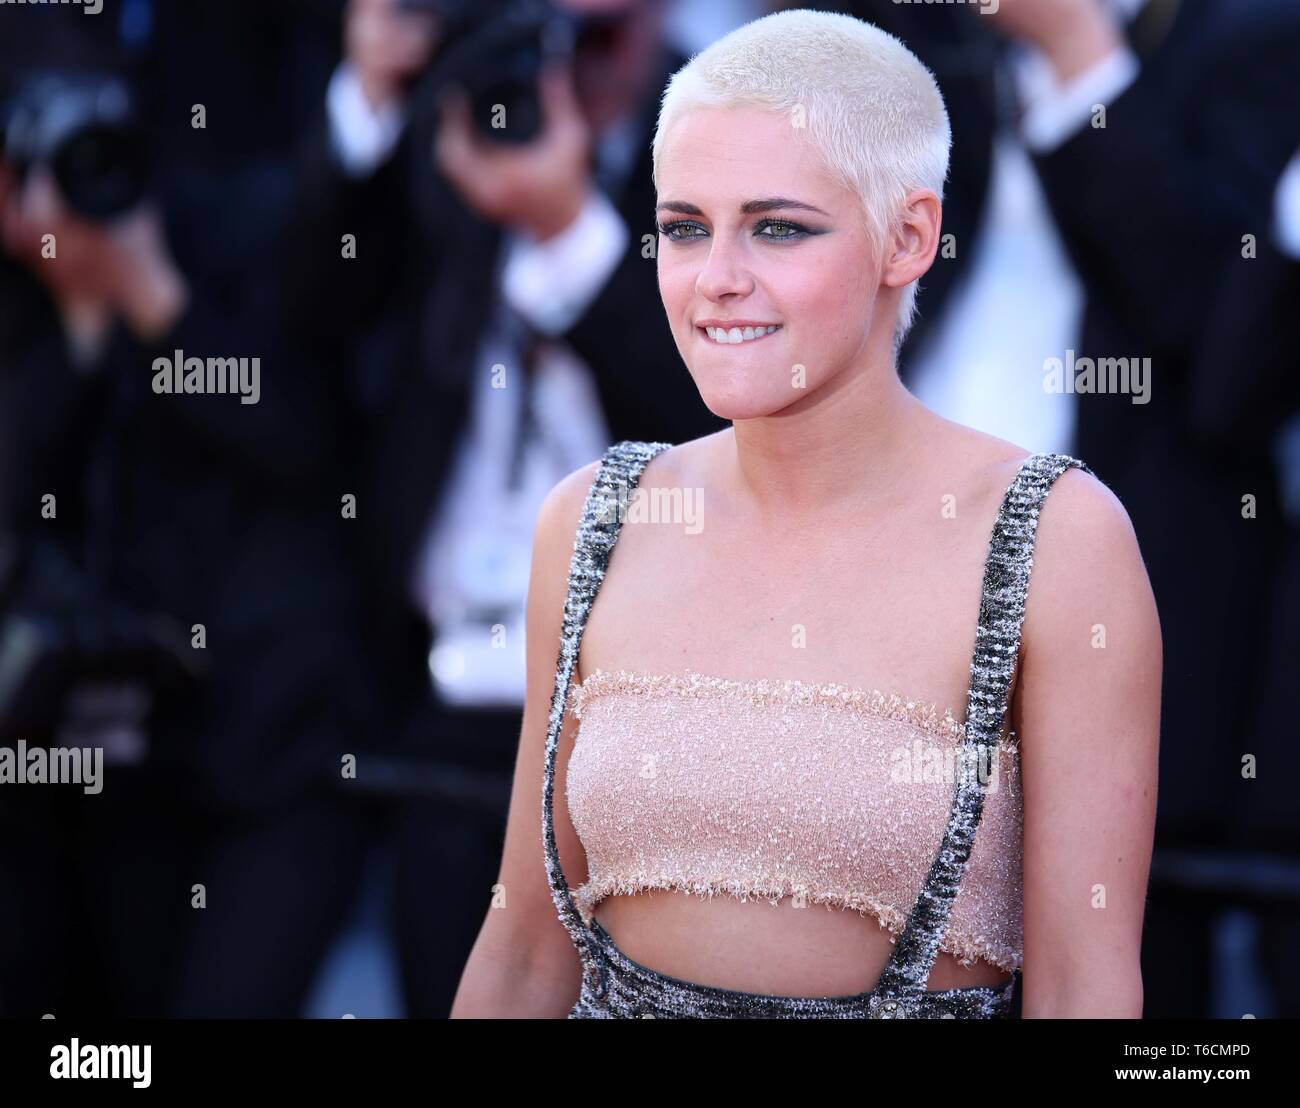 CANNES, FRANCE – MAY 20, 2017: Kristen Stewart attends the '120 Beats per Minute' screening at the 70th Cannes Film Festival (Photo: Mickael Chavet) Stock Photo